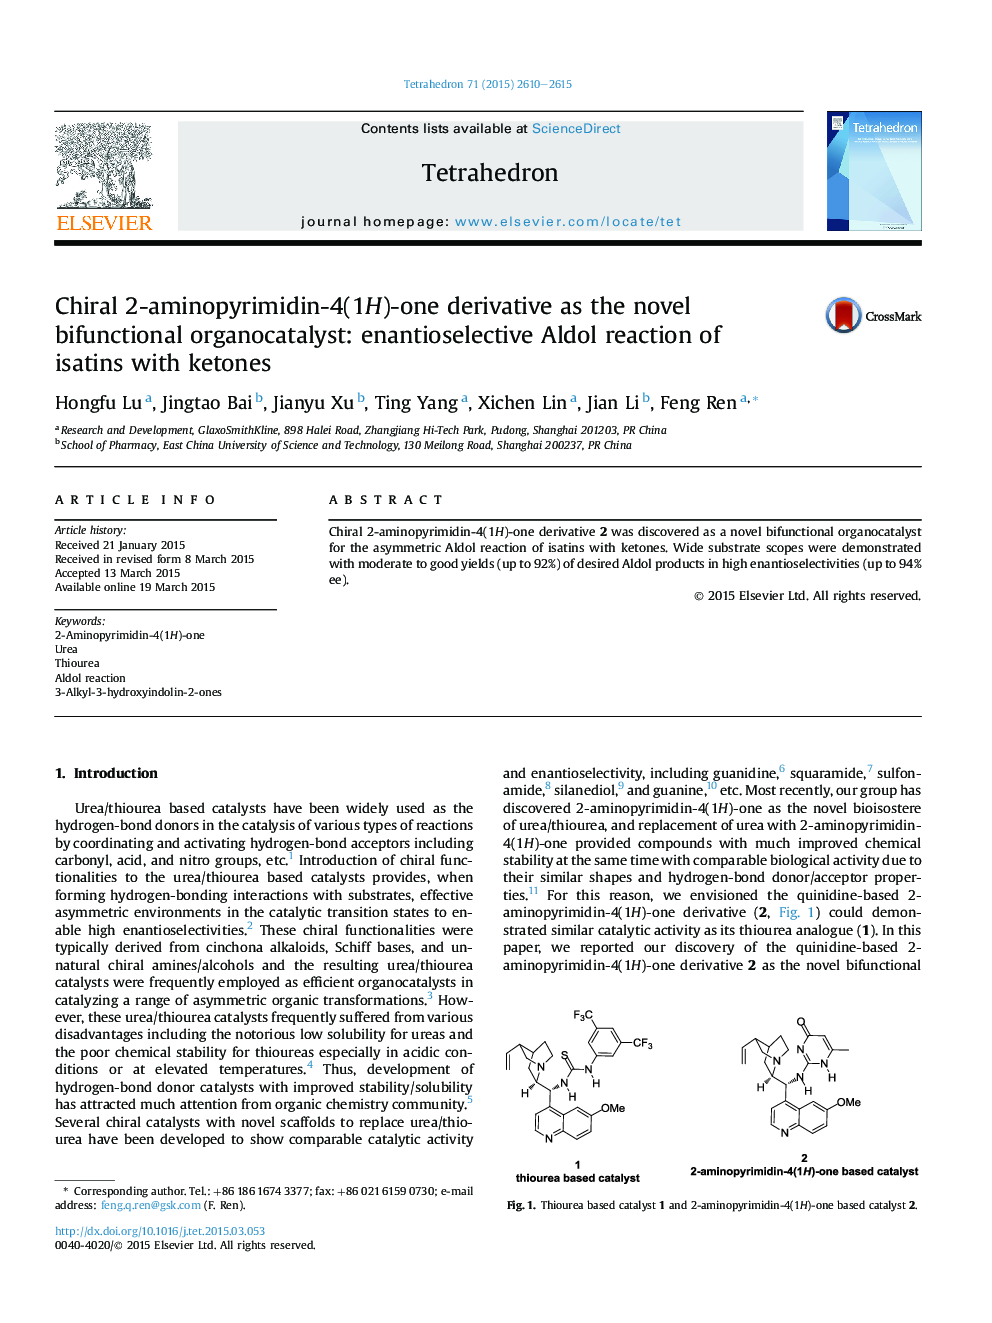 Chiral 2-aminopyrimidin-4(1H)-one derivative as the novel bifunctional organocatalyst: enantioselective Aldol reaction of isatins with ketones